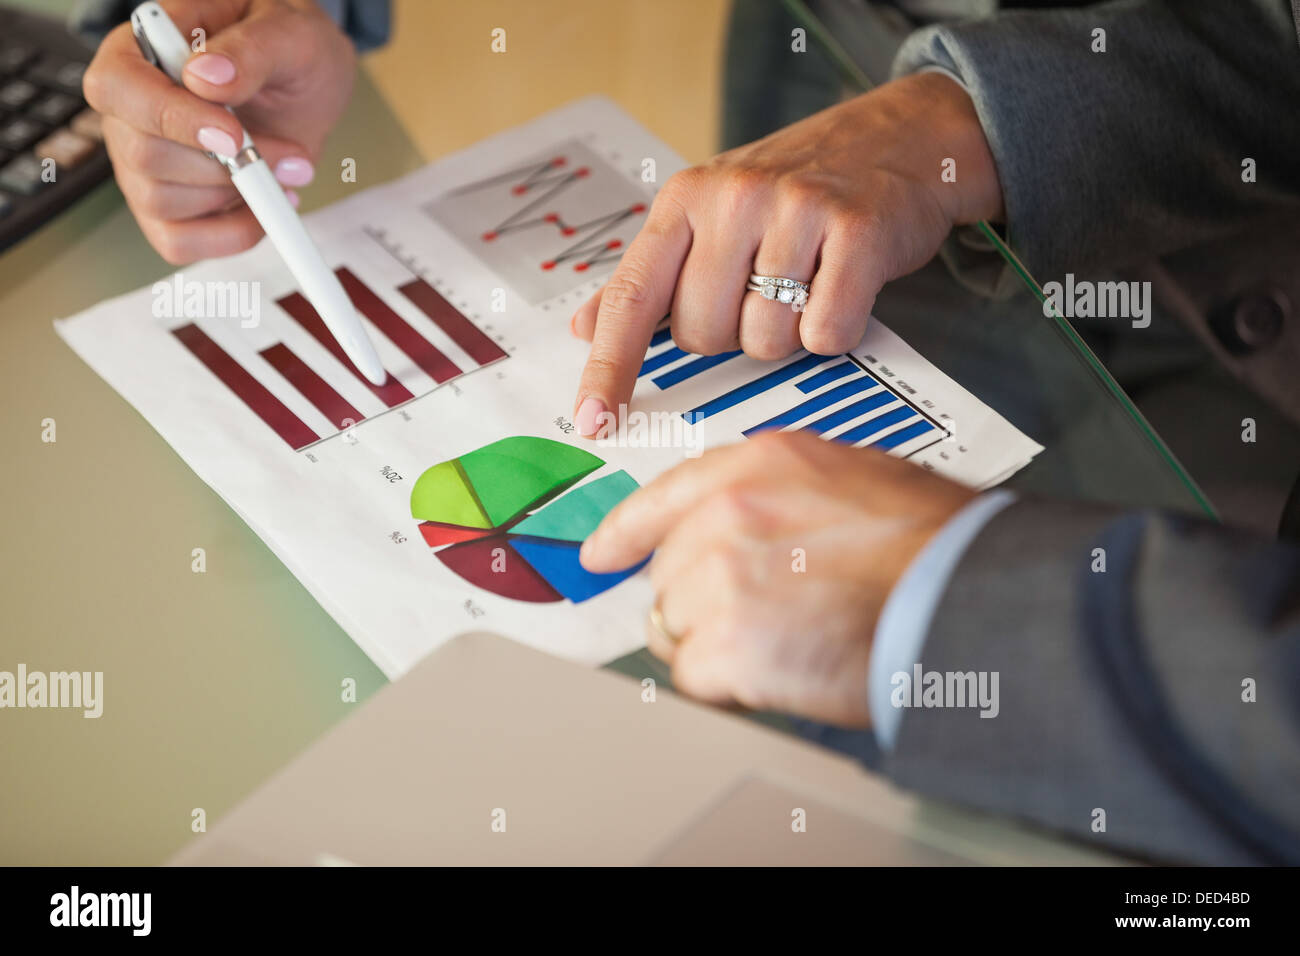 Business team going over data and graphs Stock Photo